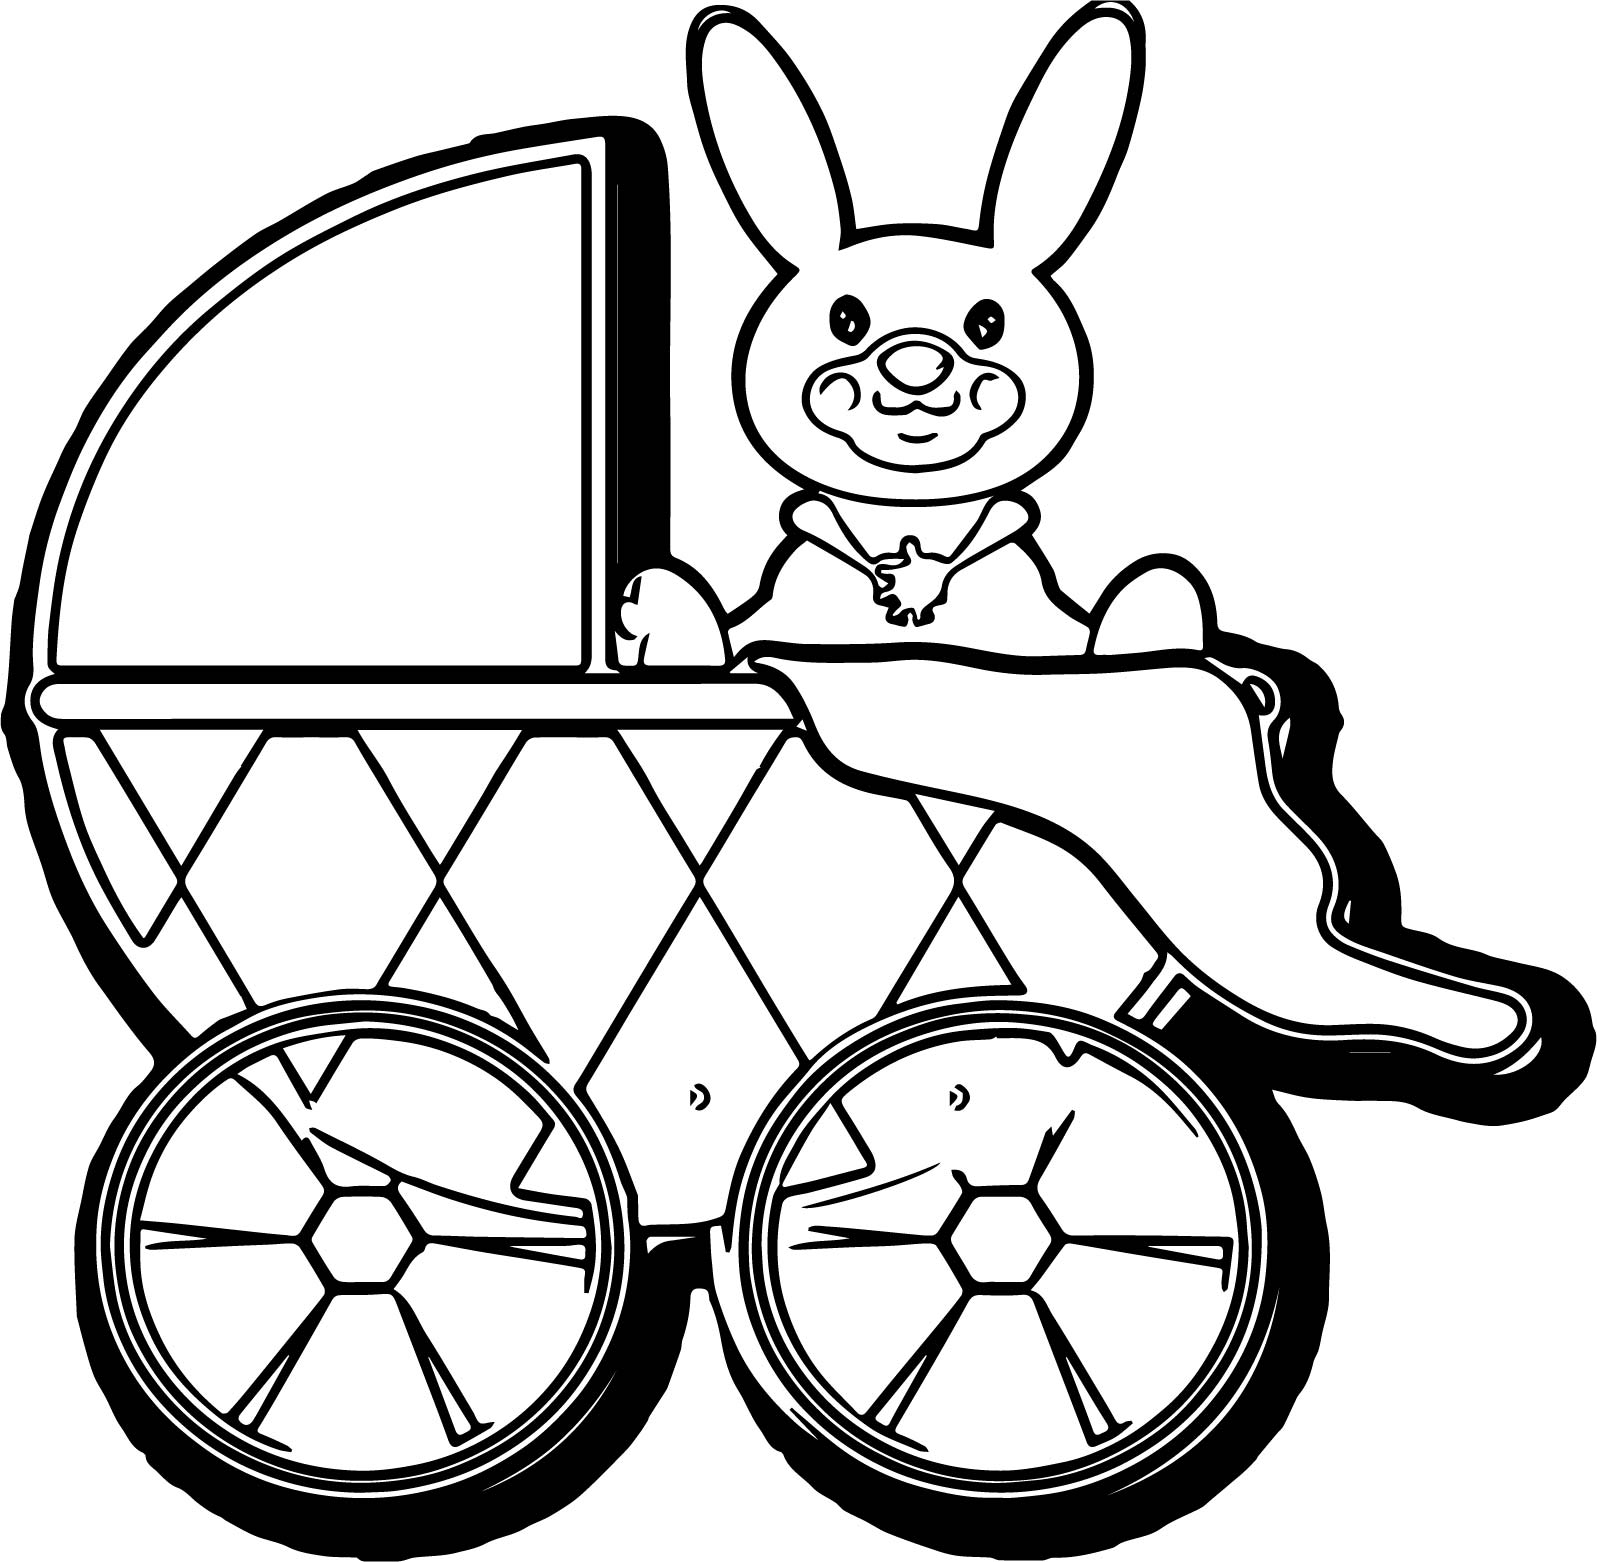 Stroller Coloring Pages to download and print for free